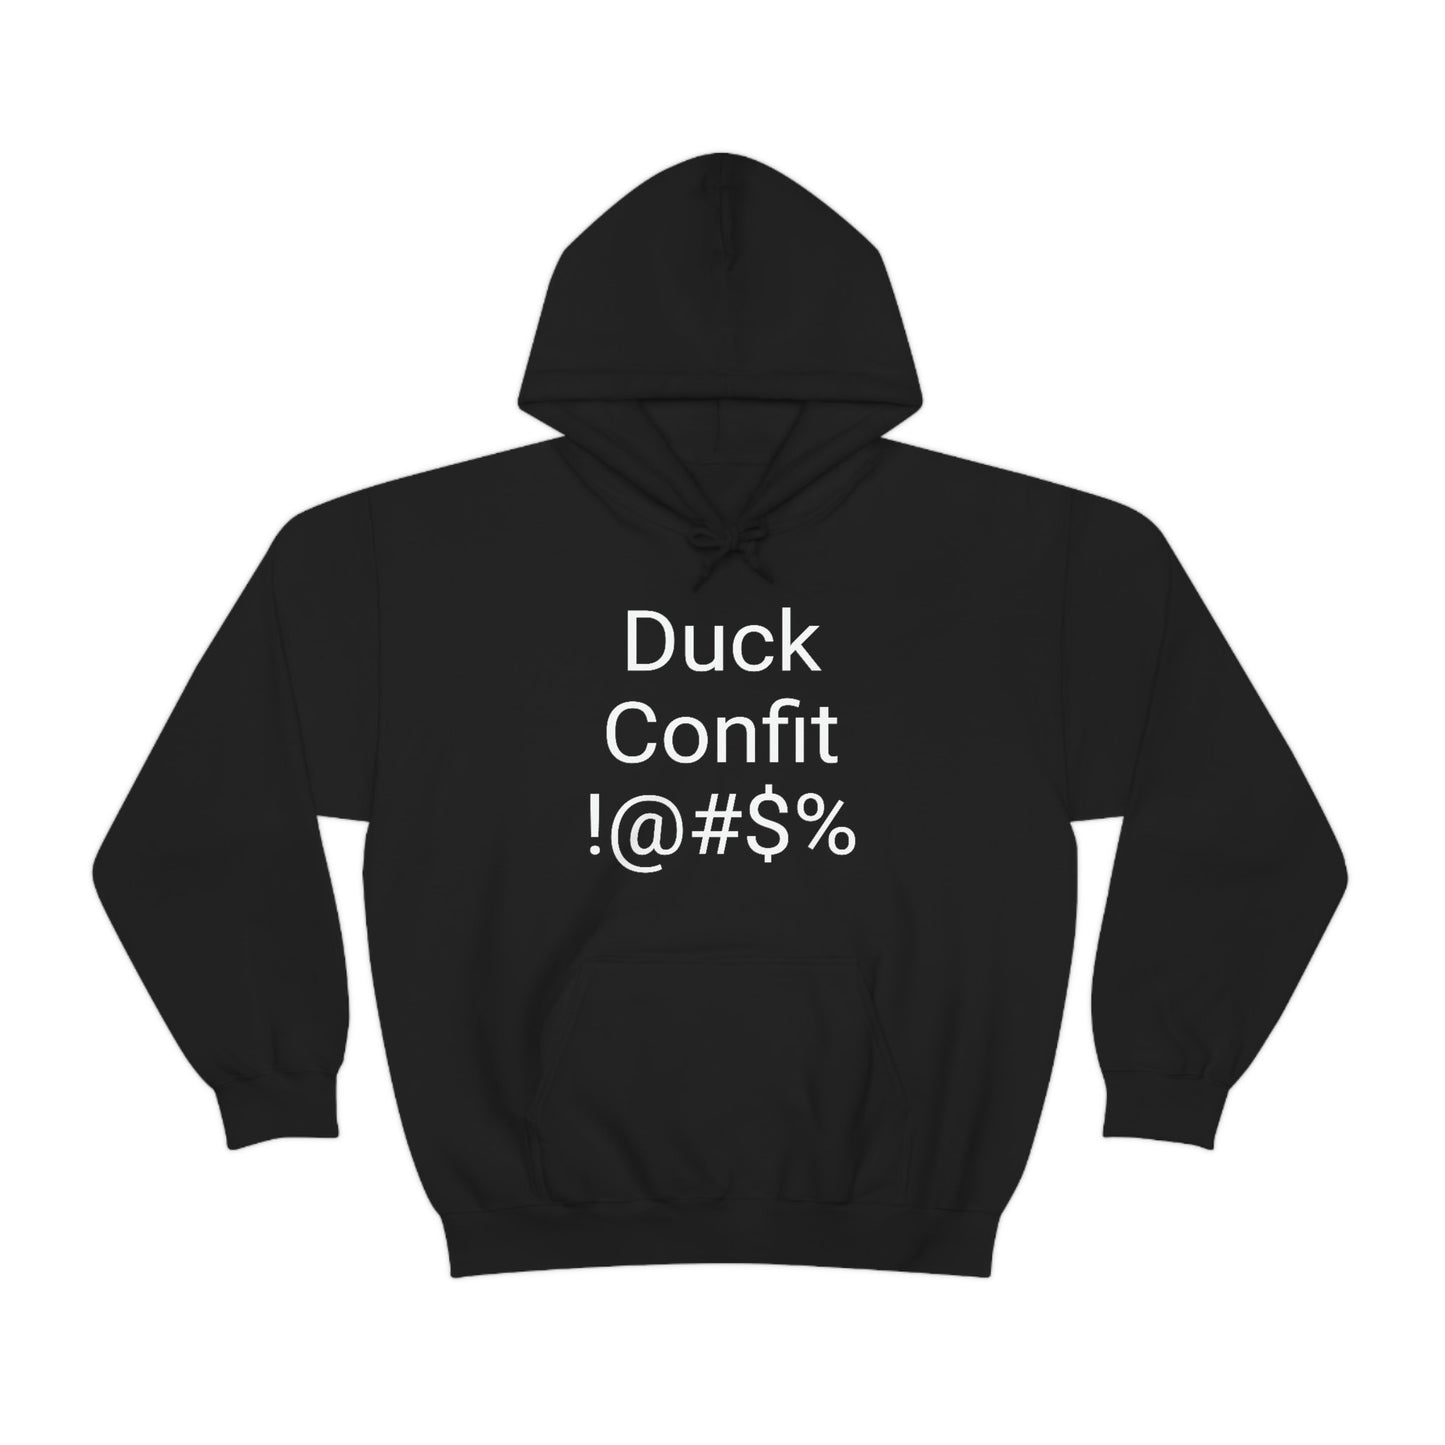 What the Duck Confit Hoodie